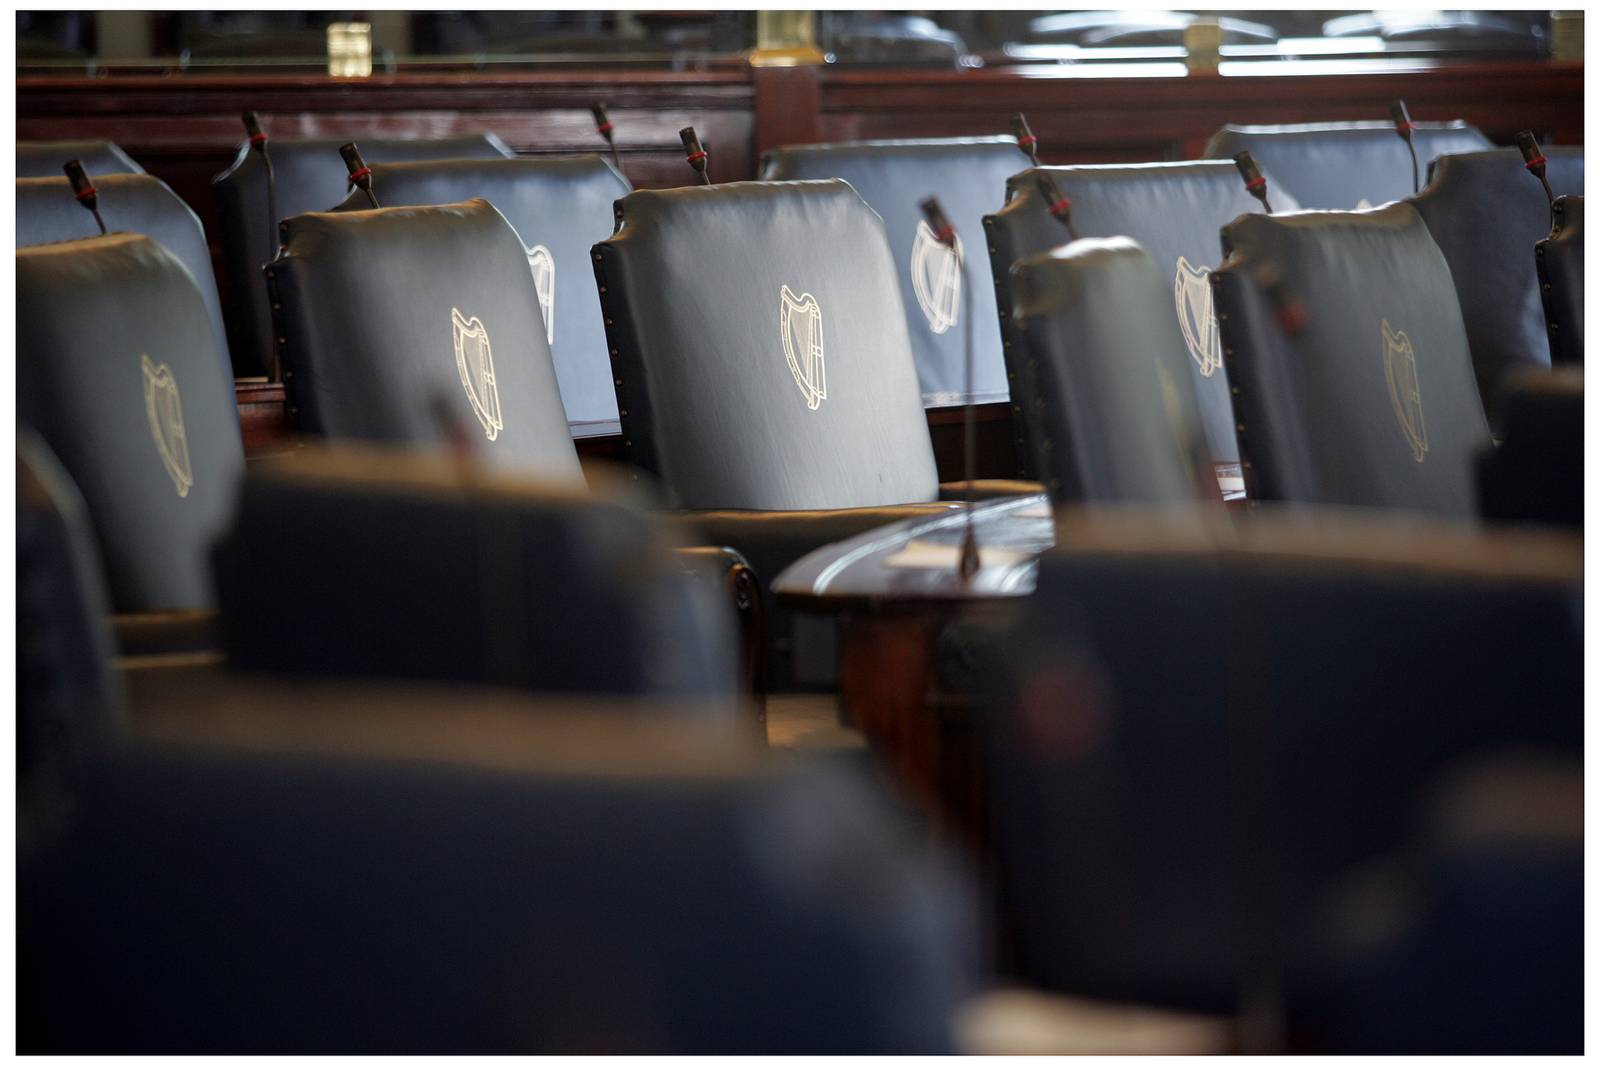 Photograph: Alan Betson, Irish Times Staff Photographer.
--------------------------------------

Houses of the Oireachtas Commission suppliment
Close up Detail of seats in the Seanad / Senate  at Leinster House
taken on 26/3/07